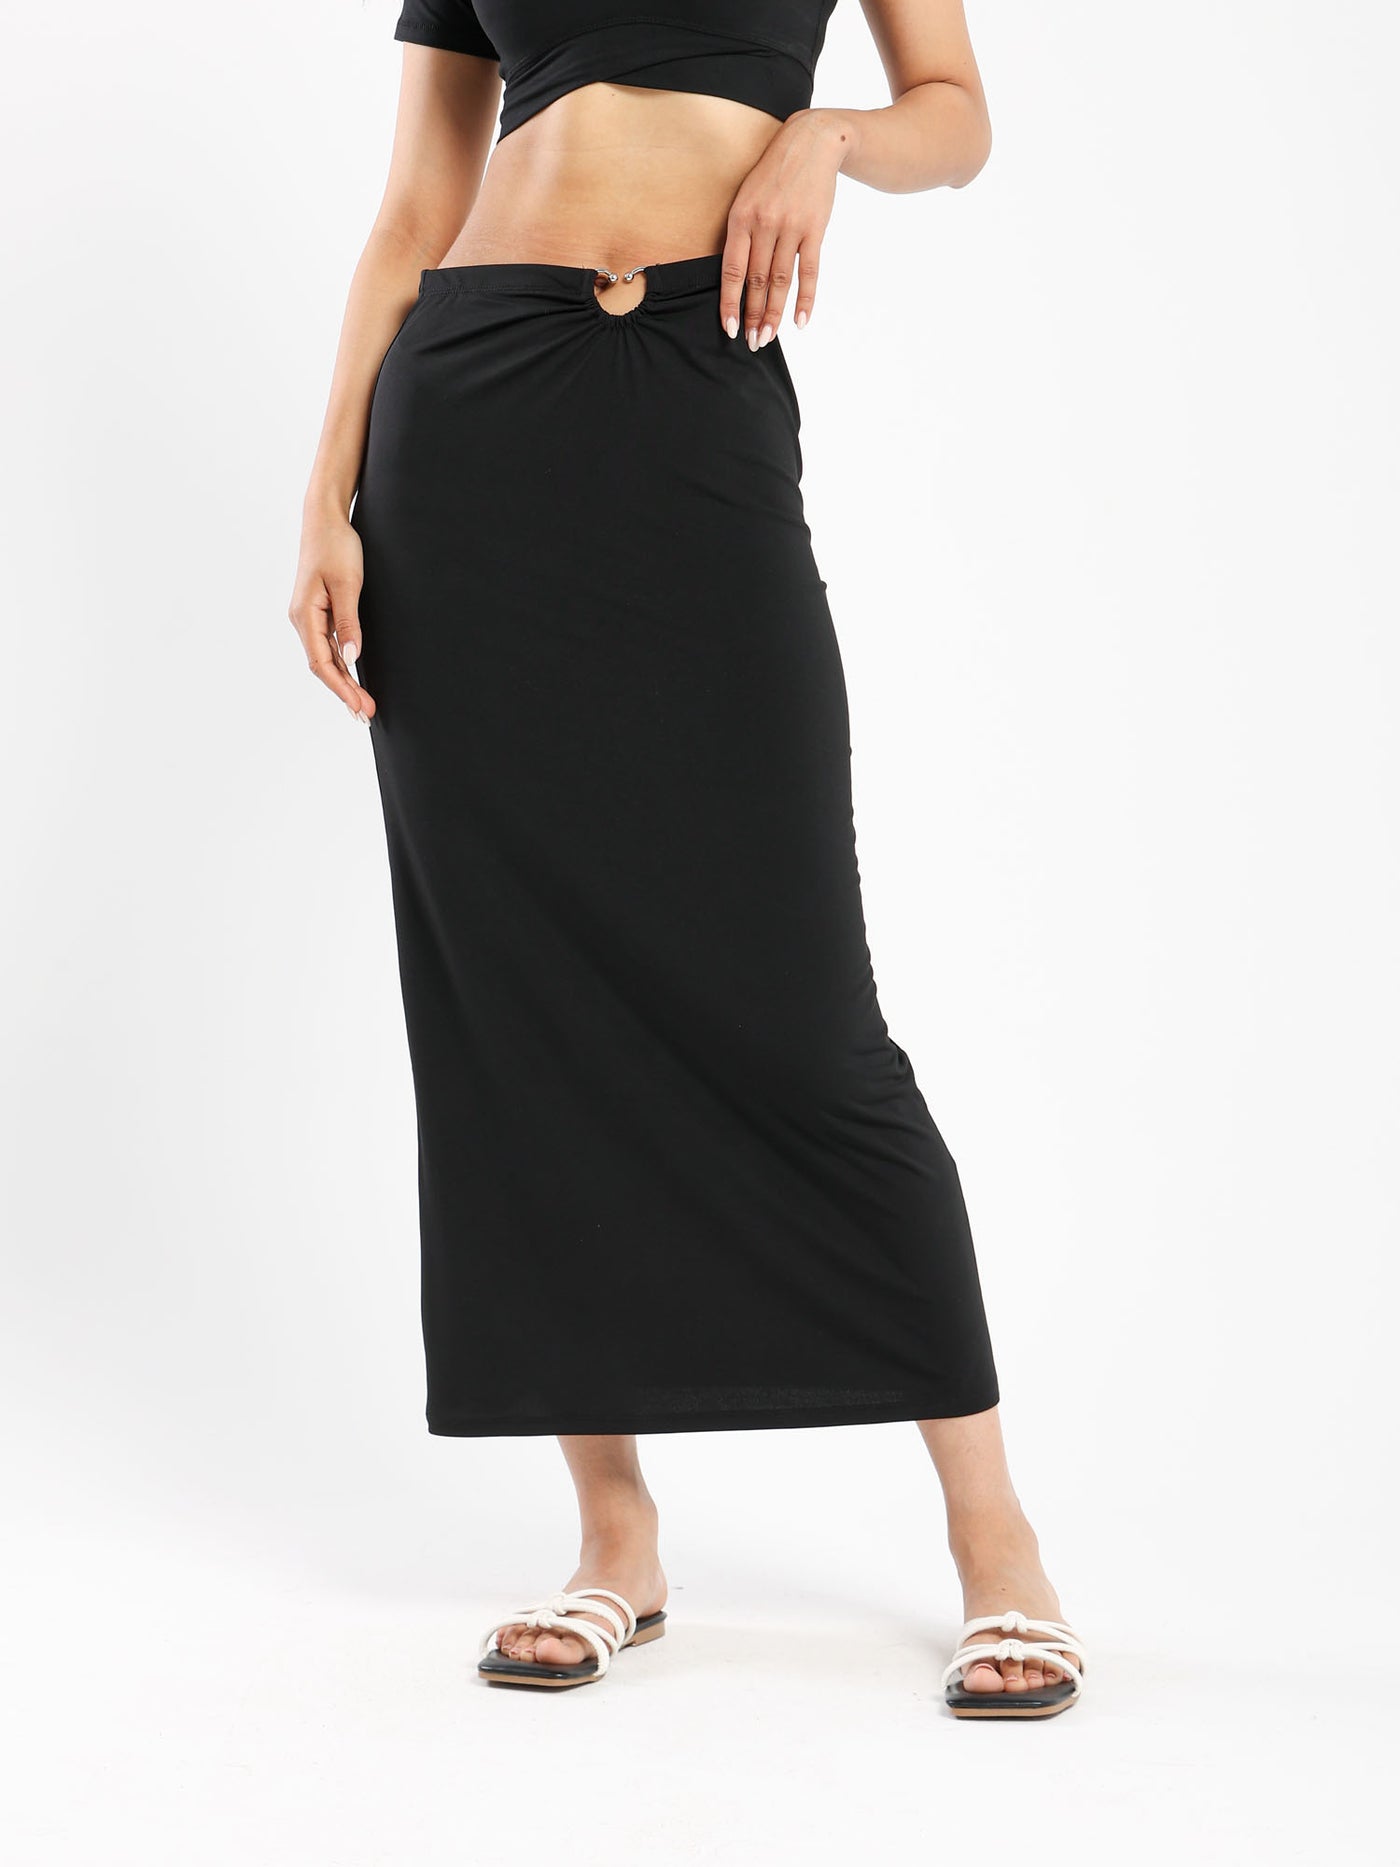 Skirt - Maxi Length - With Ring